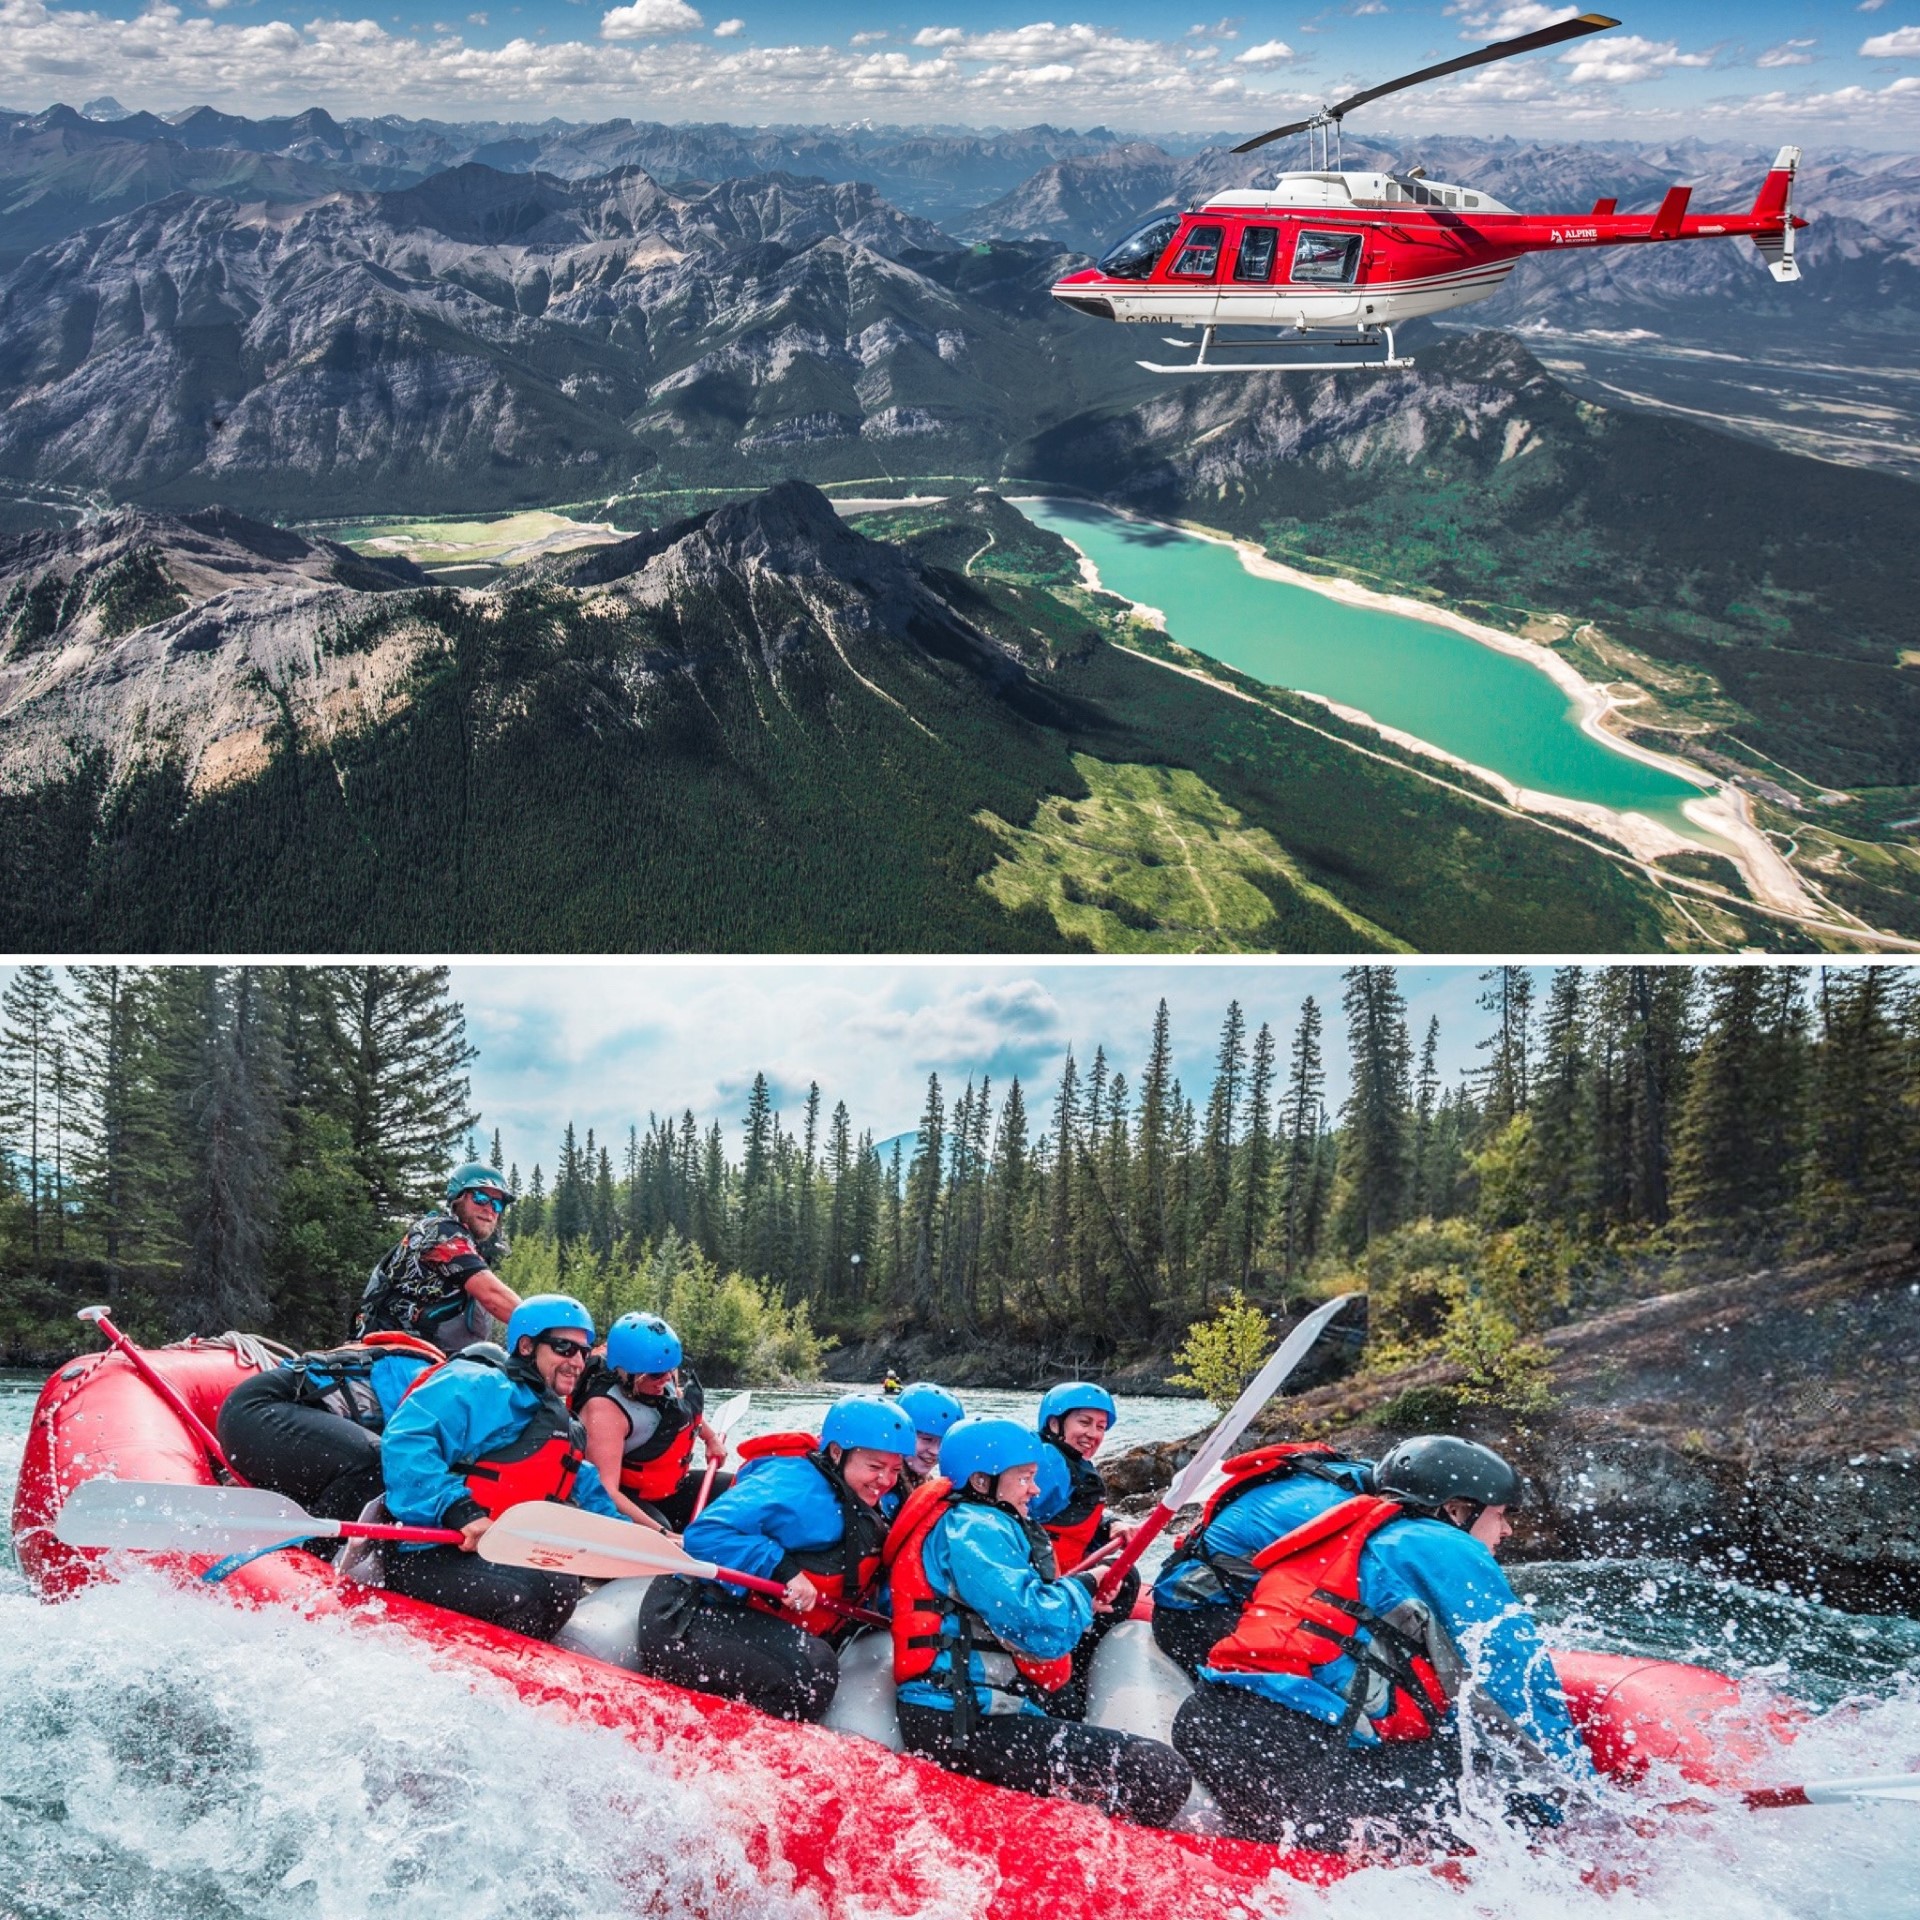 Alpine Helicopter over mountains and Rafters in a red raft going through whitewater